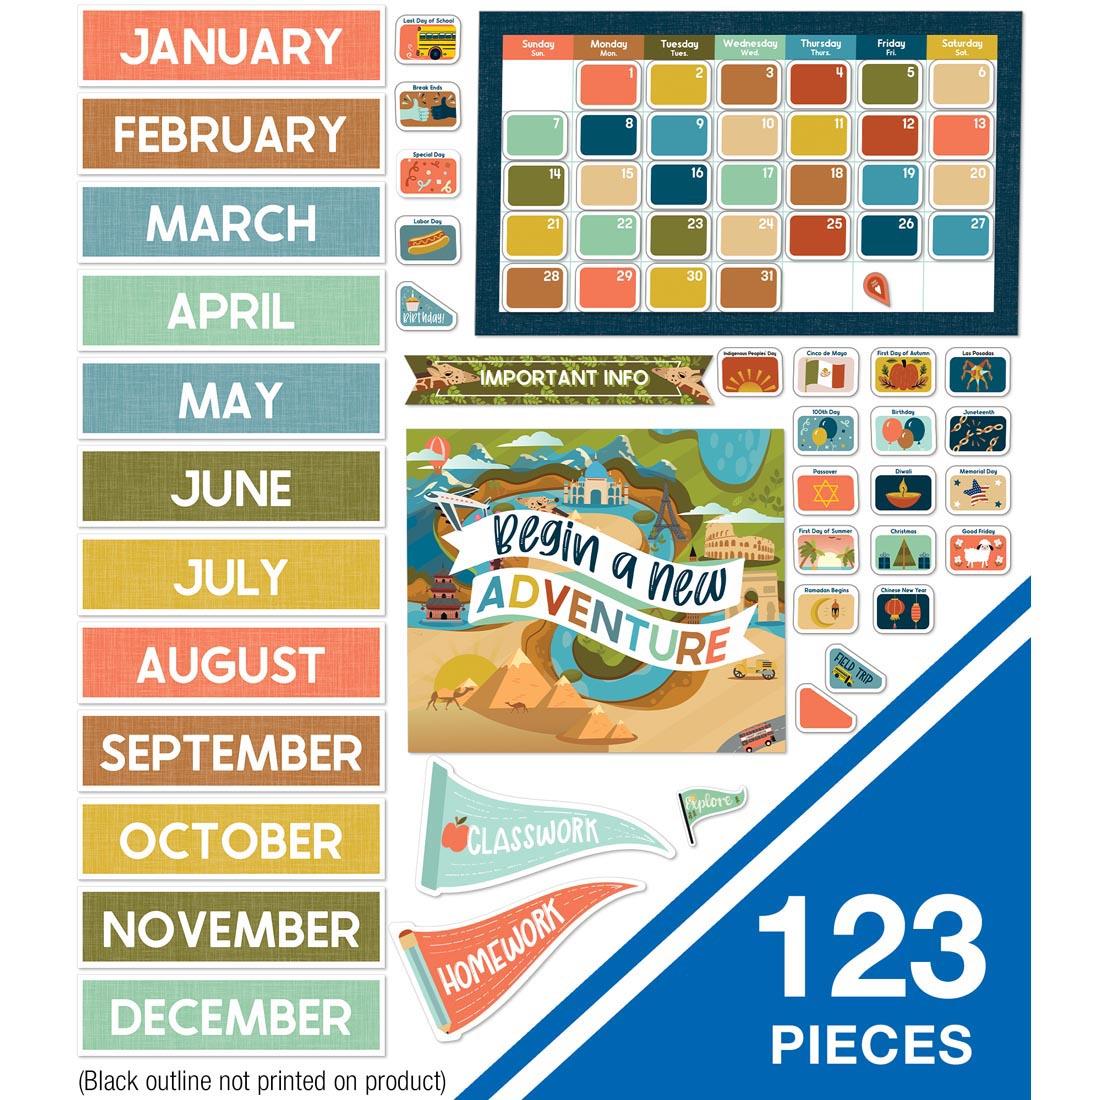 Most of the pieces from the Let's Explore Calendar Bulletin Board Set By Carson Dellosa, noting there are 123 pieces in all